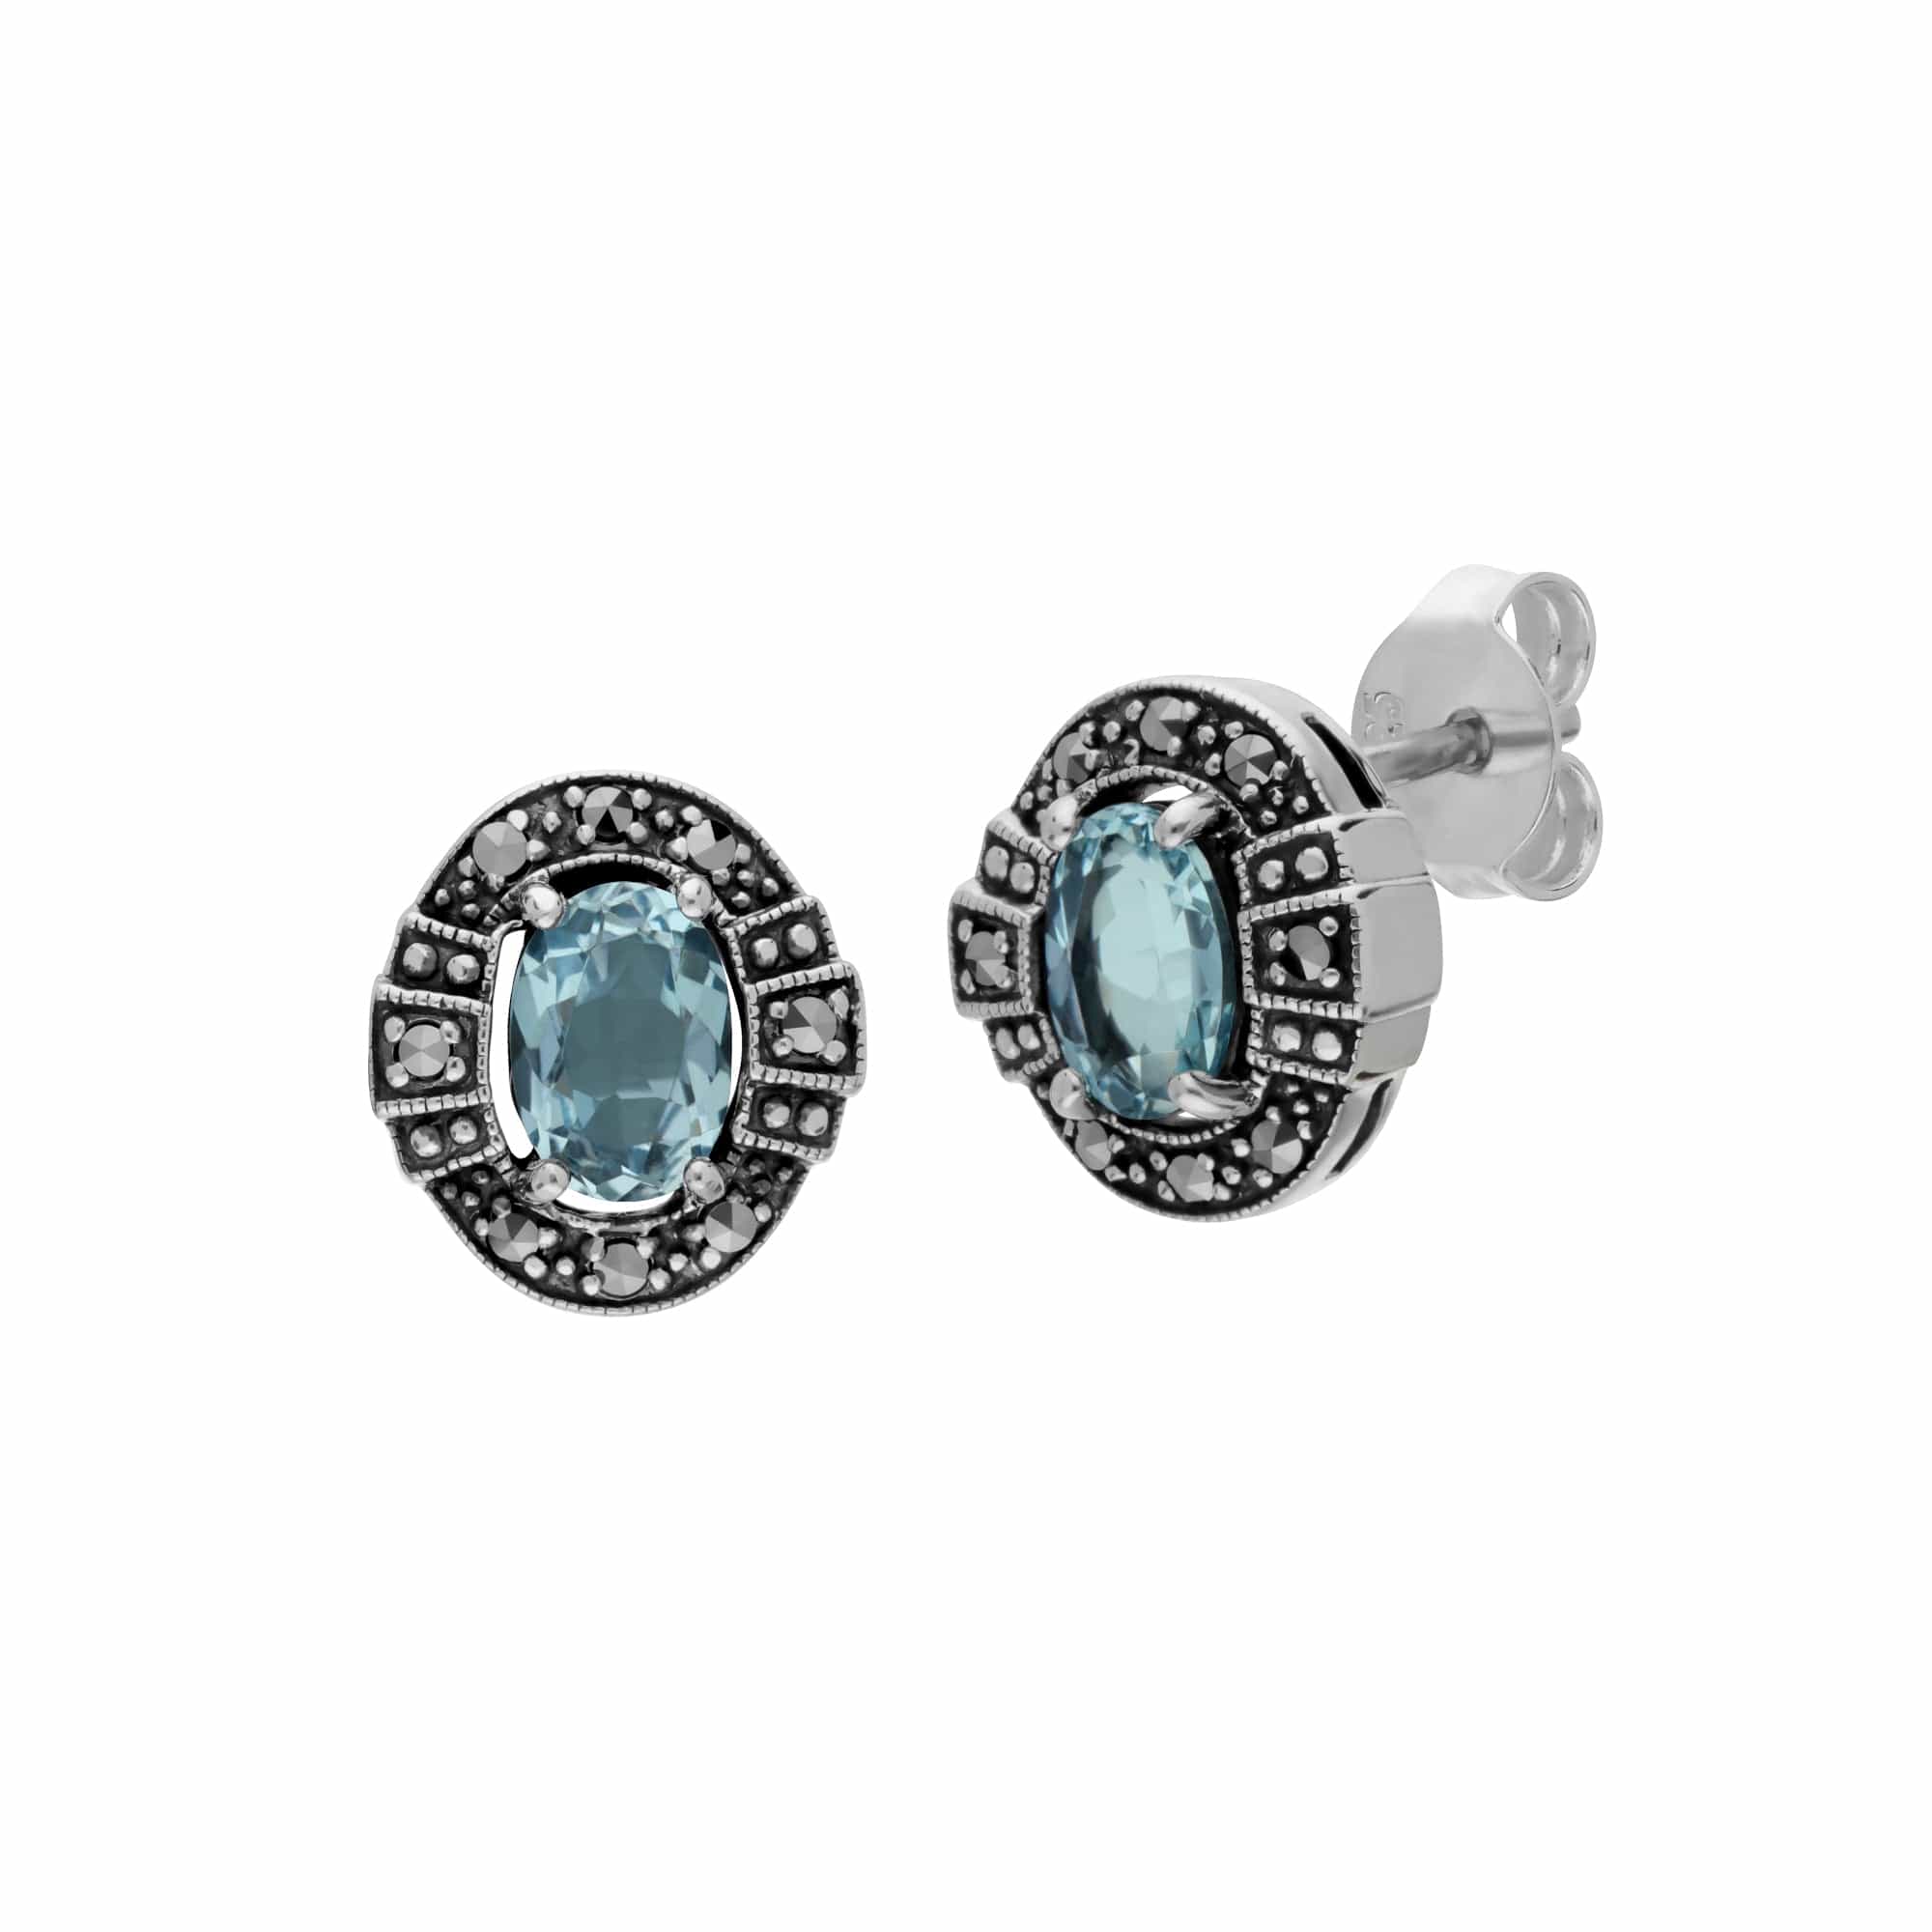 214E873001925-214R605701925 Art Deco Style Oval Blue Topaz and Marcasite Cluster Stud Earrings & Ring Set in 925 Sterling Silver 2